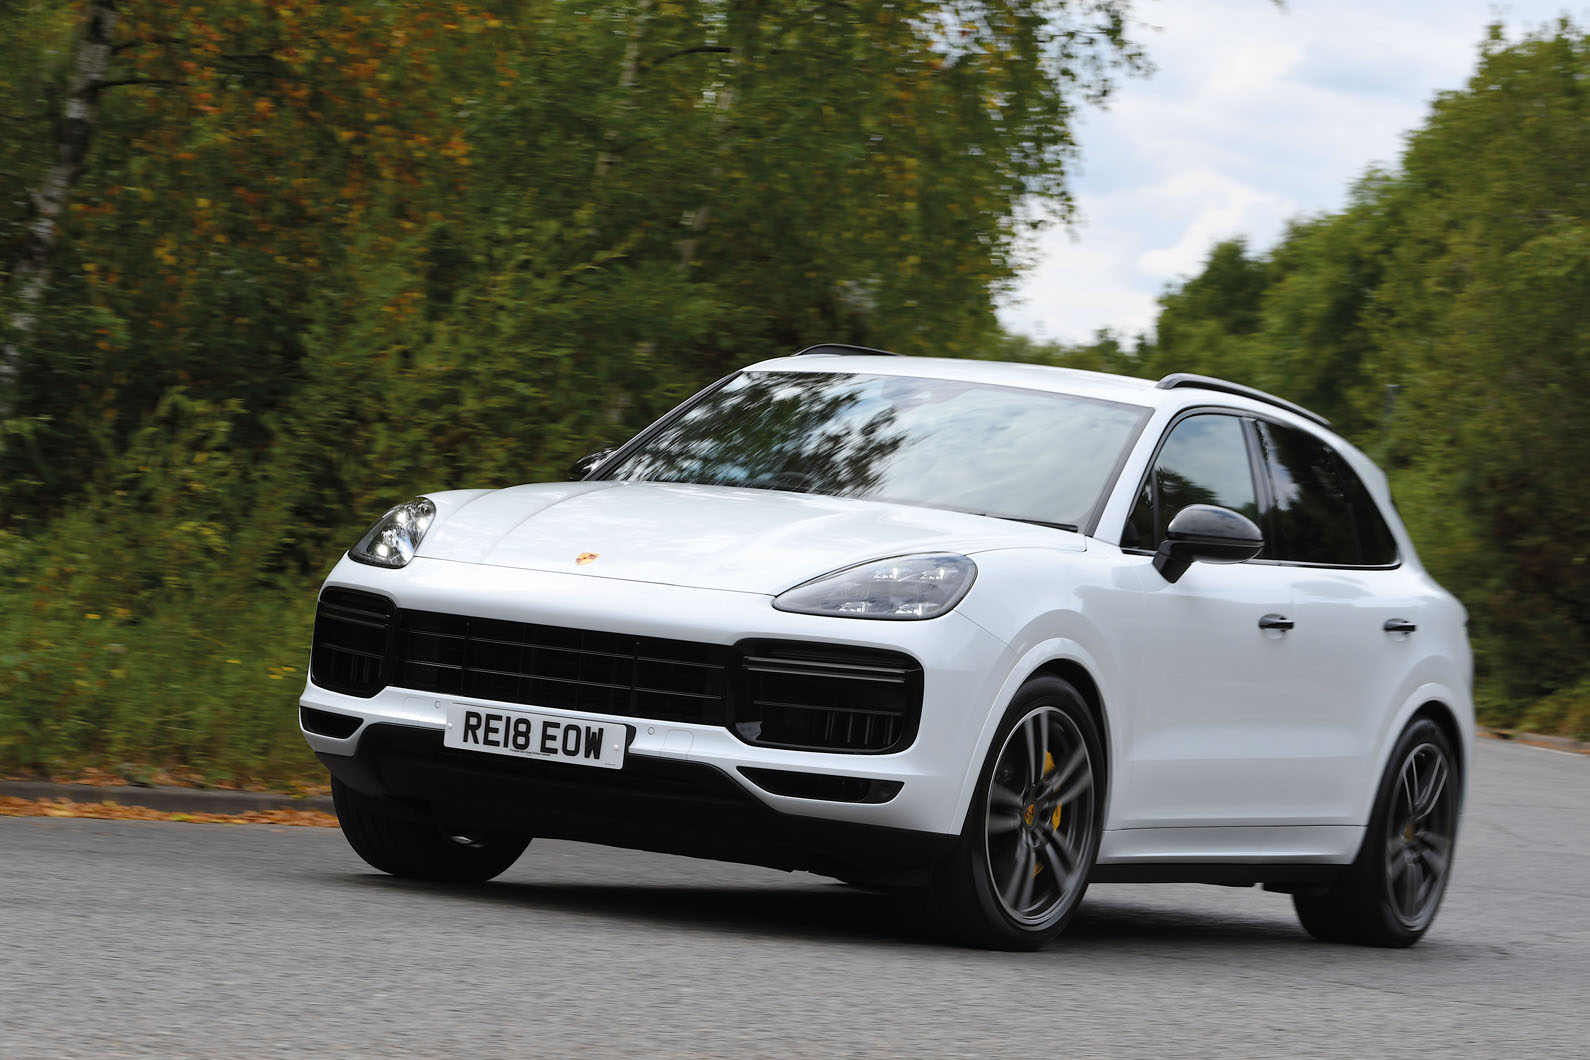 Porsche Cayenne Turbo 2018 road test review on the road front